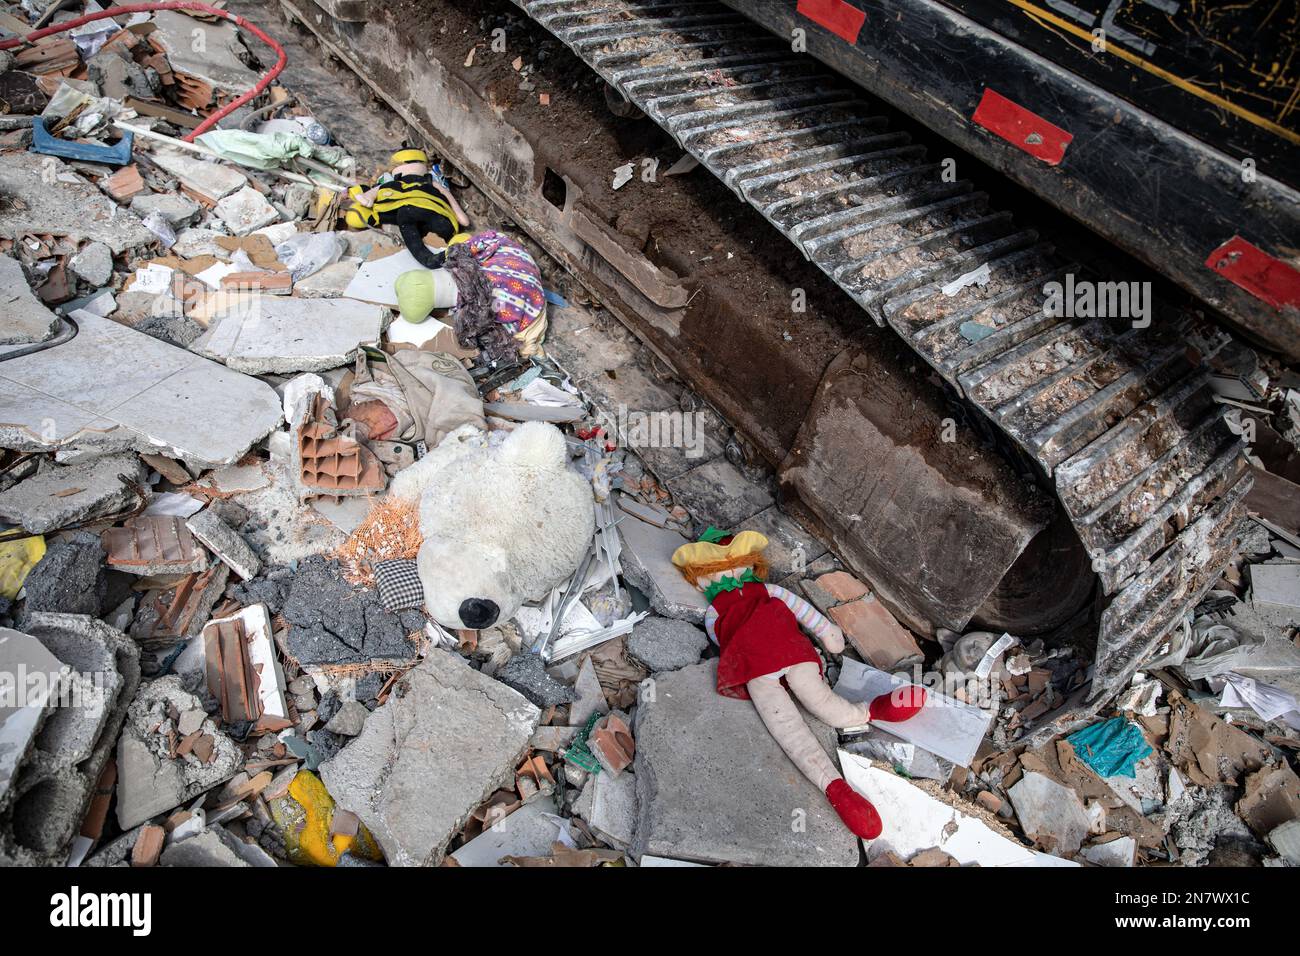 Adiyaman, Turkey. 10th Feb, 2023. Toys seen among the debris piles. Monday morning, a strong 7.7 magnitude, centered in the Pazarcik district, jolted Kahramanmaras and strongly shook several provinces, including Gaziantep, Sanliurfa, Diyarbakir, Adana, Adiyaman, Malatya, Osmaniye, Hatay, and Kilis. Later, at 13.24 p.m. (1024GMT), a 7.6 magnitude quake centered in Kahramanmaras' Elbistan district struck the region. Turkiye declared 7 days of national mourning after deadly earthquakes in southern provinces. (Photo by Onur Dogman/SOPA Images/Sipa USA) Credit: Sipa USA/Alamy Live News Stock Photo